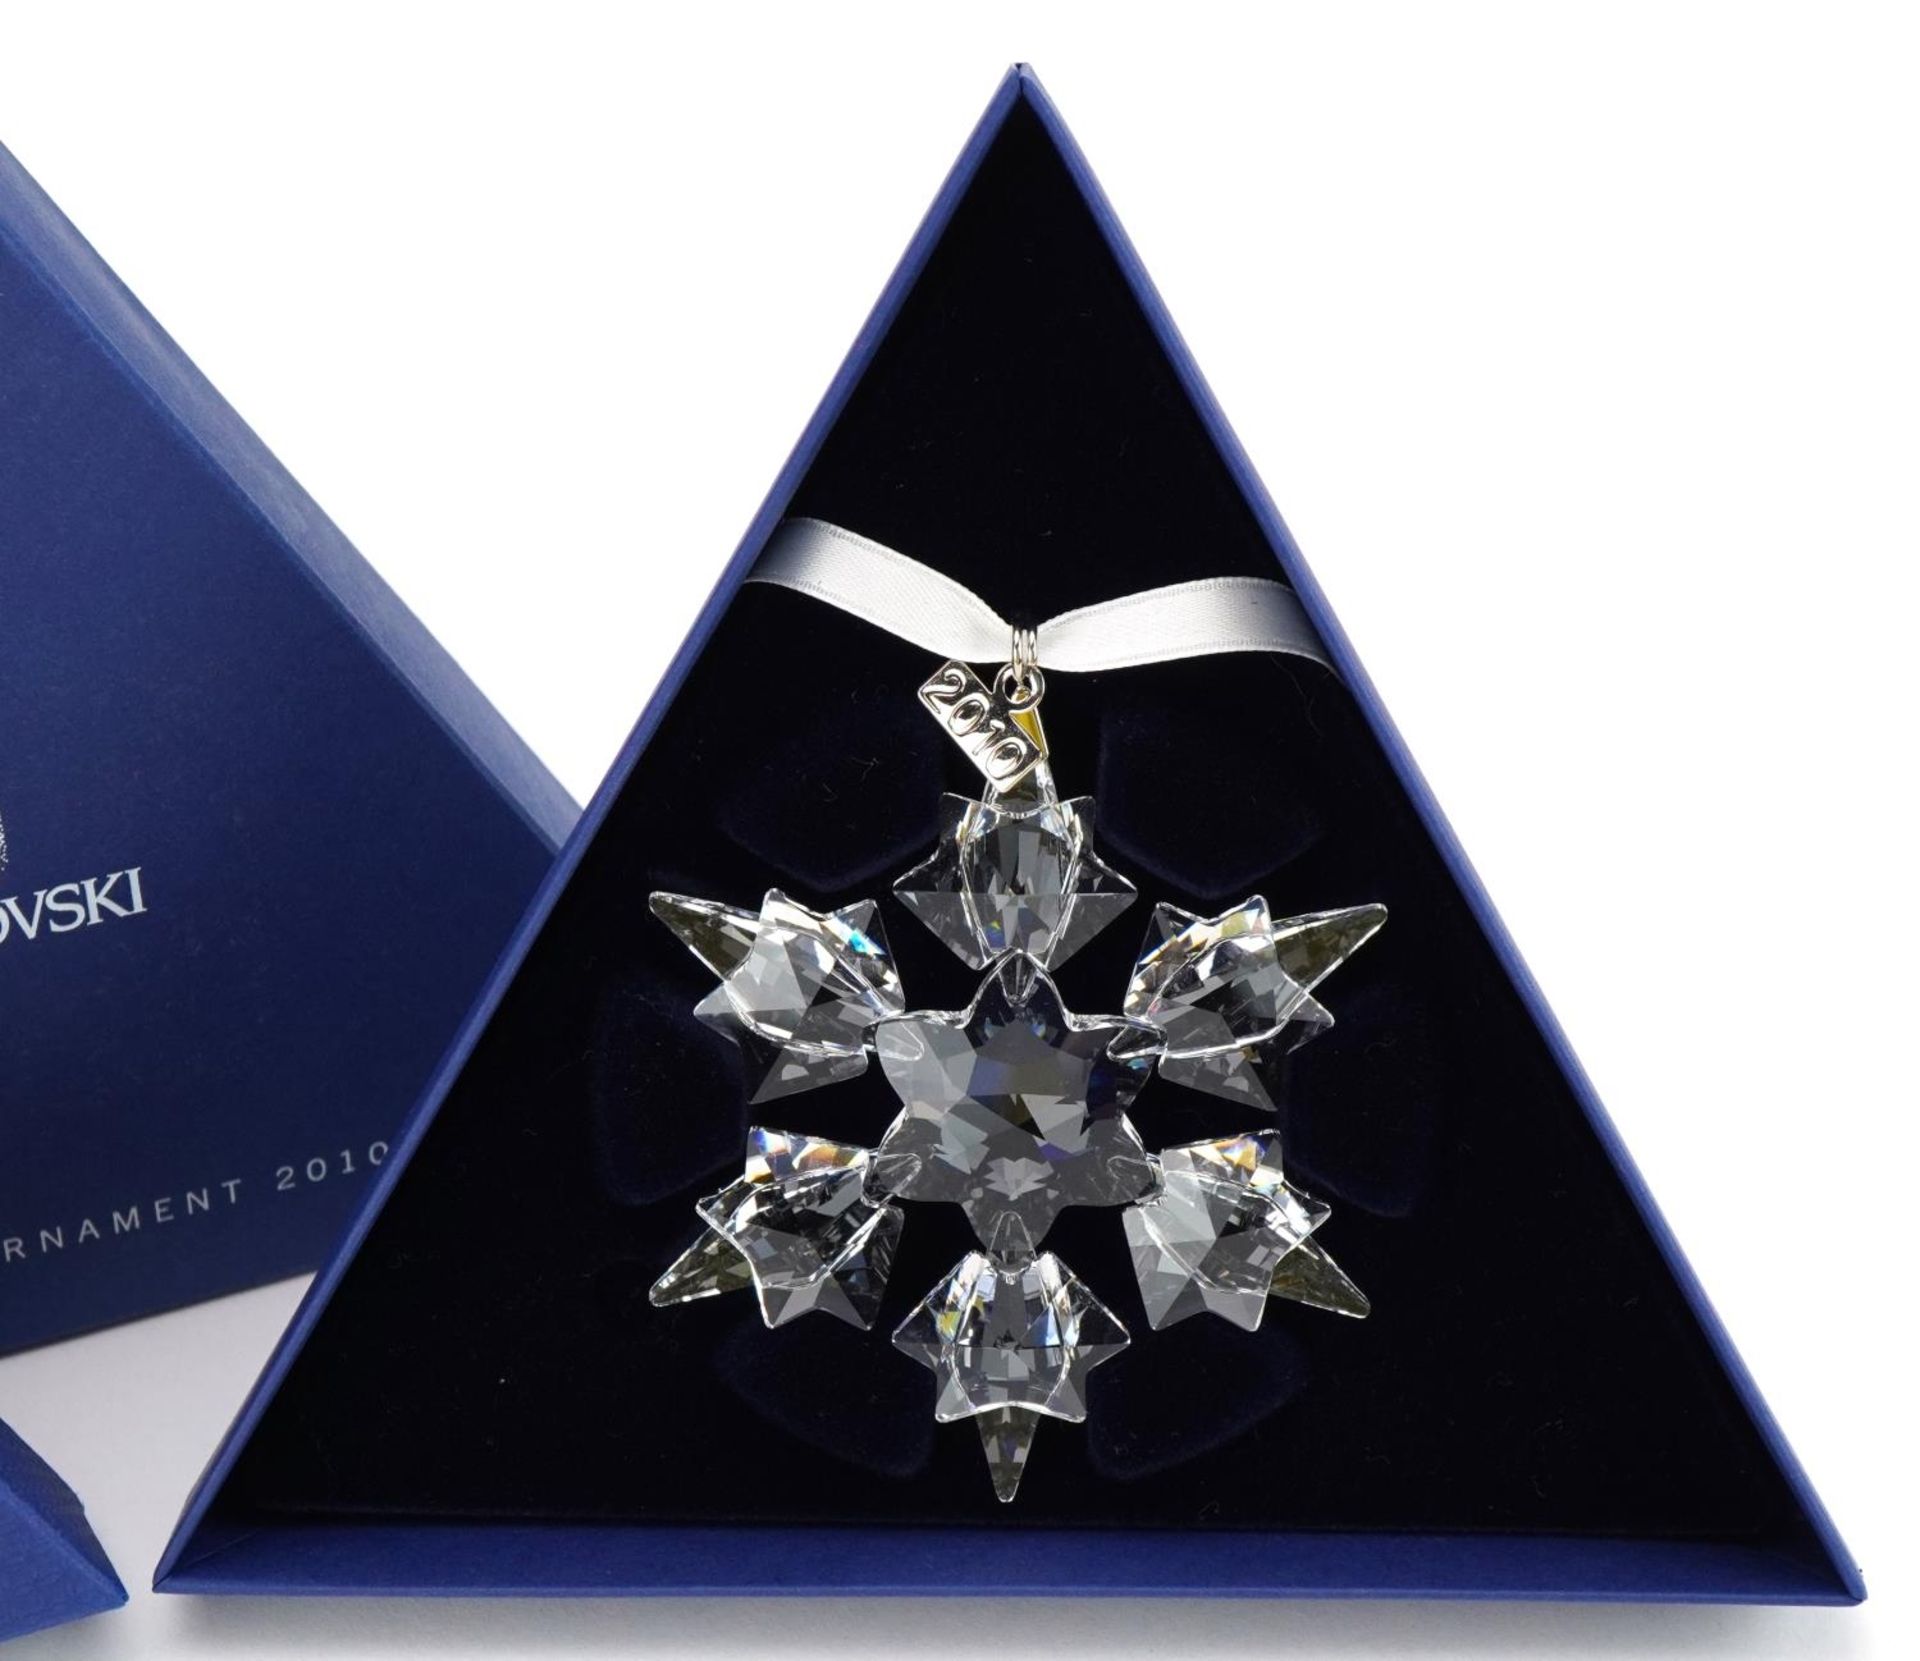 Two Swarovski Crystal Christmas ornaments with boxes comprising dates 2010 and 2011 - Image 3 of 4